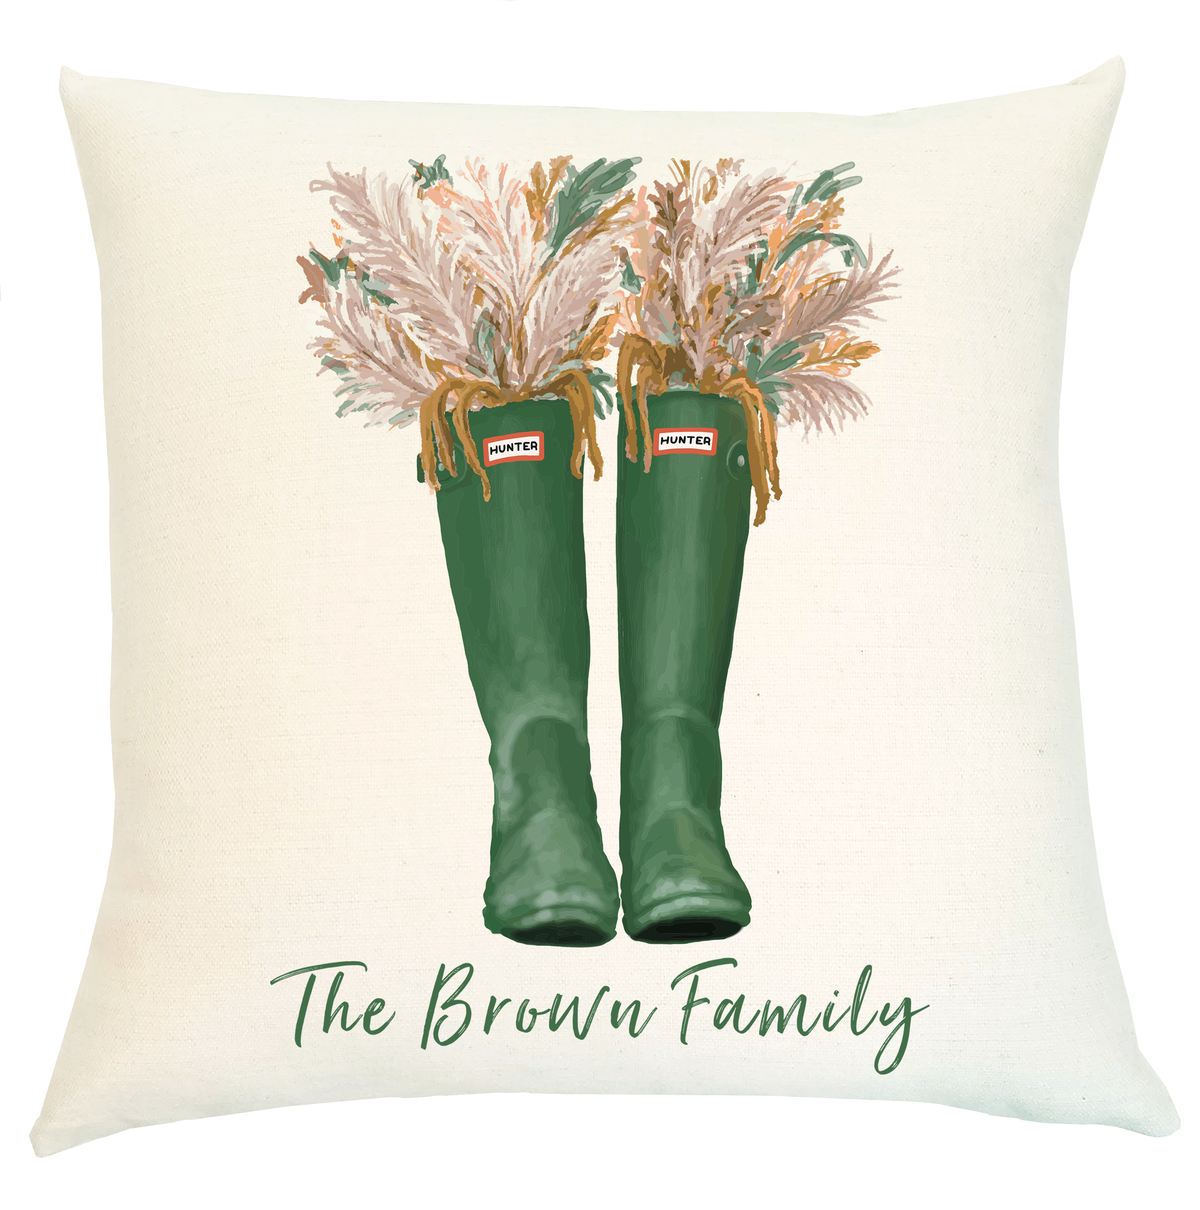 Pillow Personalized - Green Boots